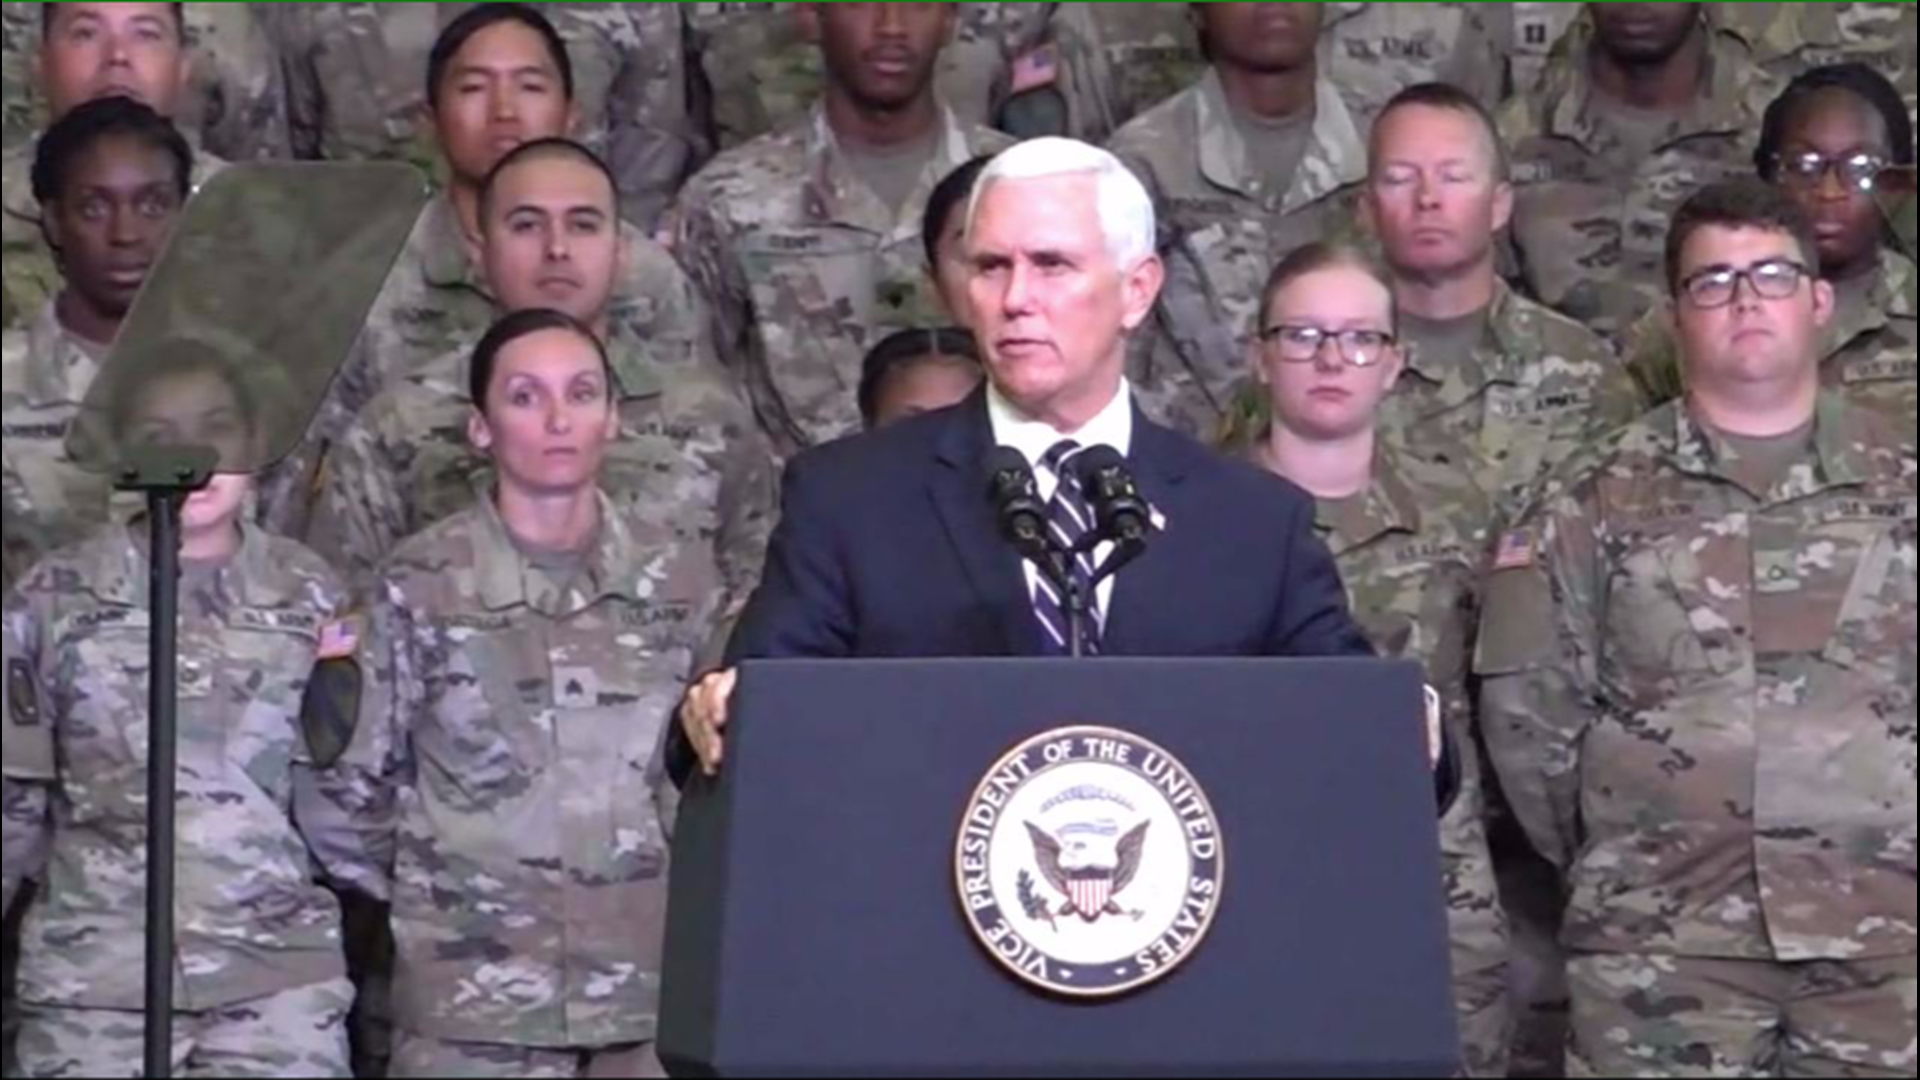 From Louisiana to Texas, Pence makes a stop on Fort Hood.